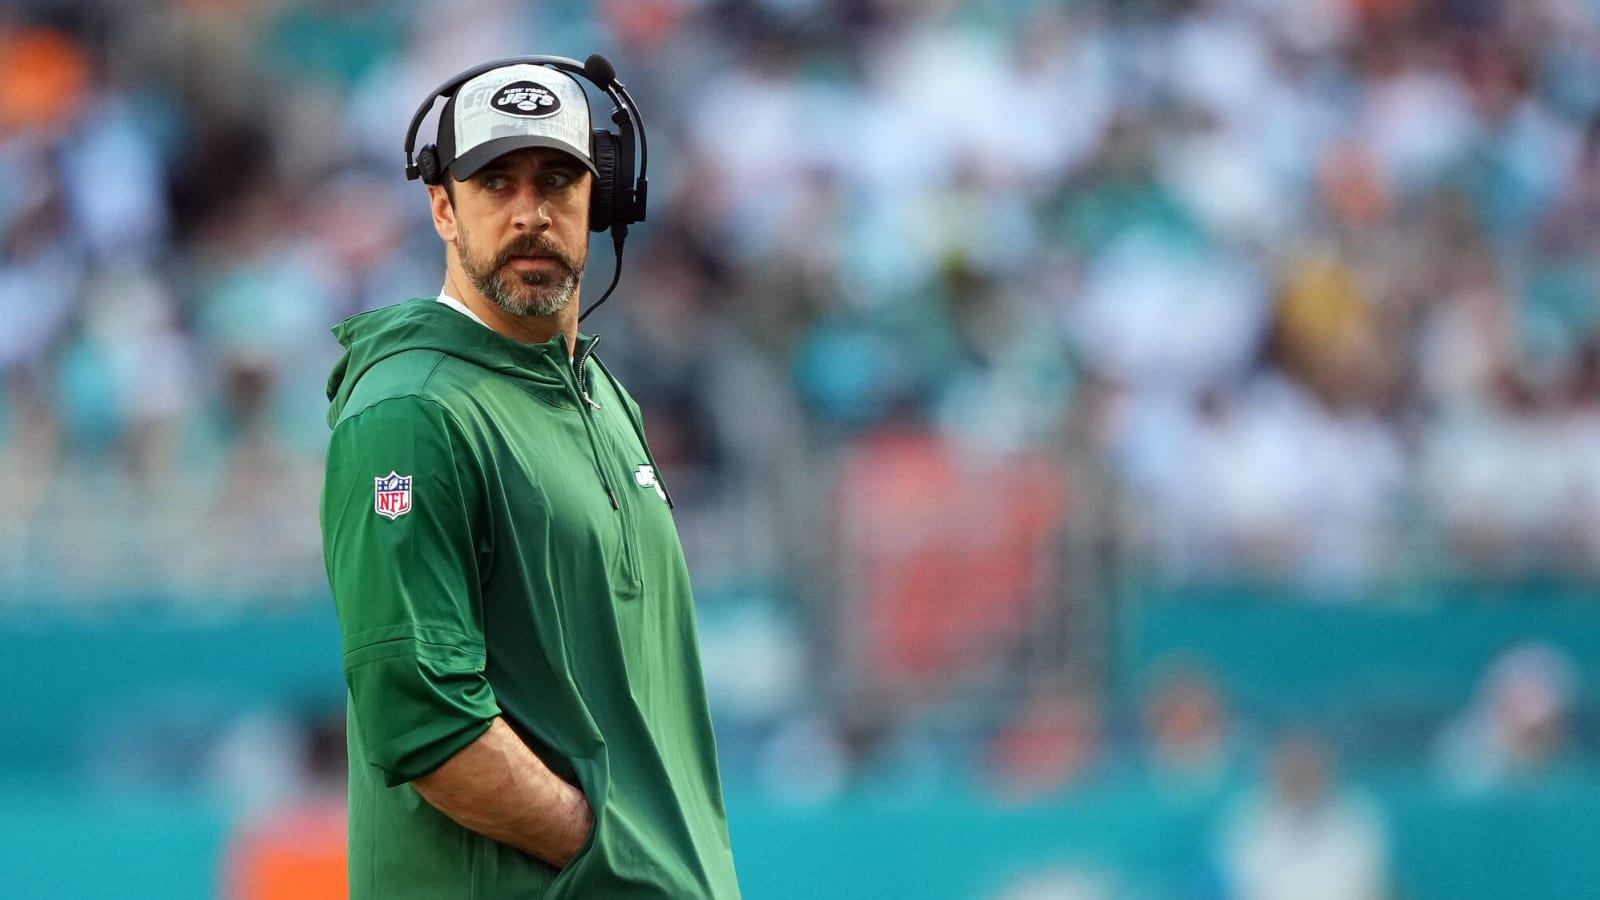 Schefter: Jets to Open Season on MNF vs 49ers